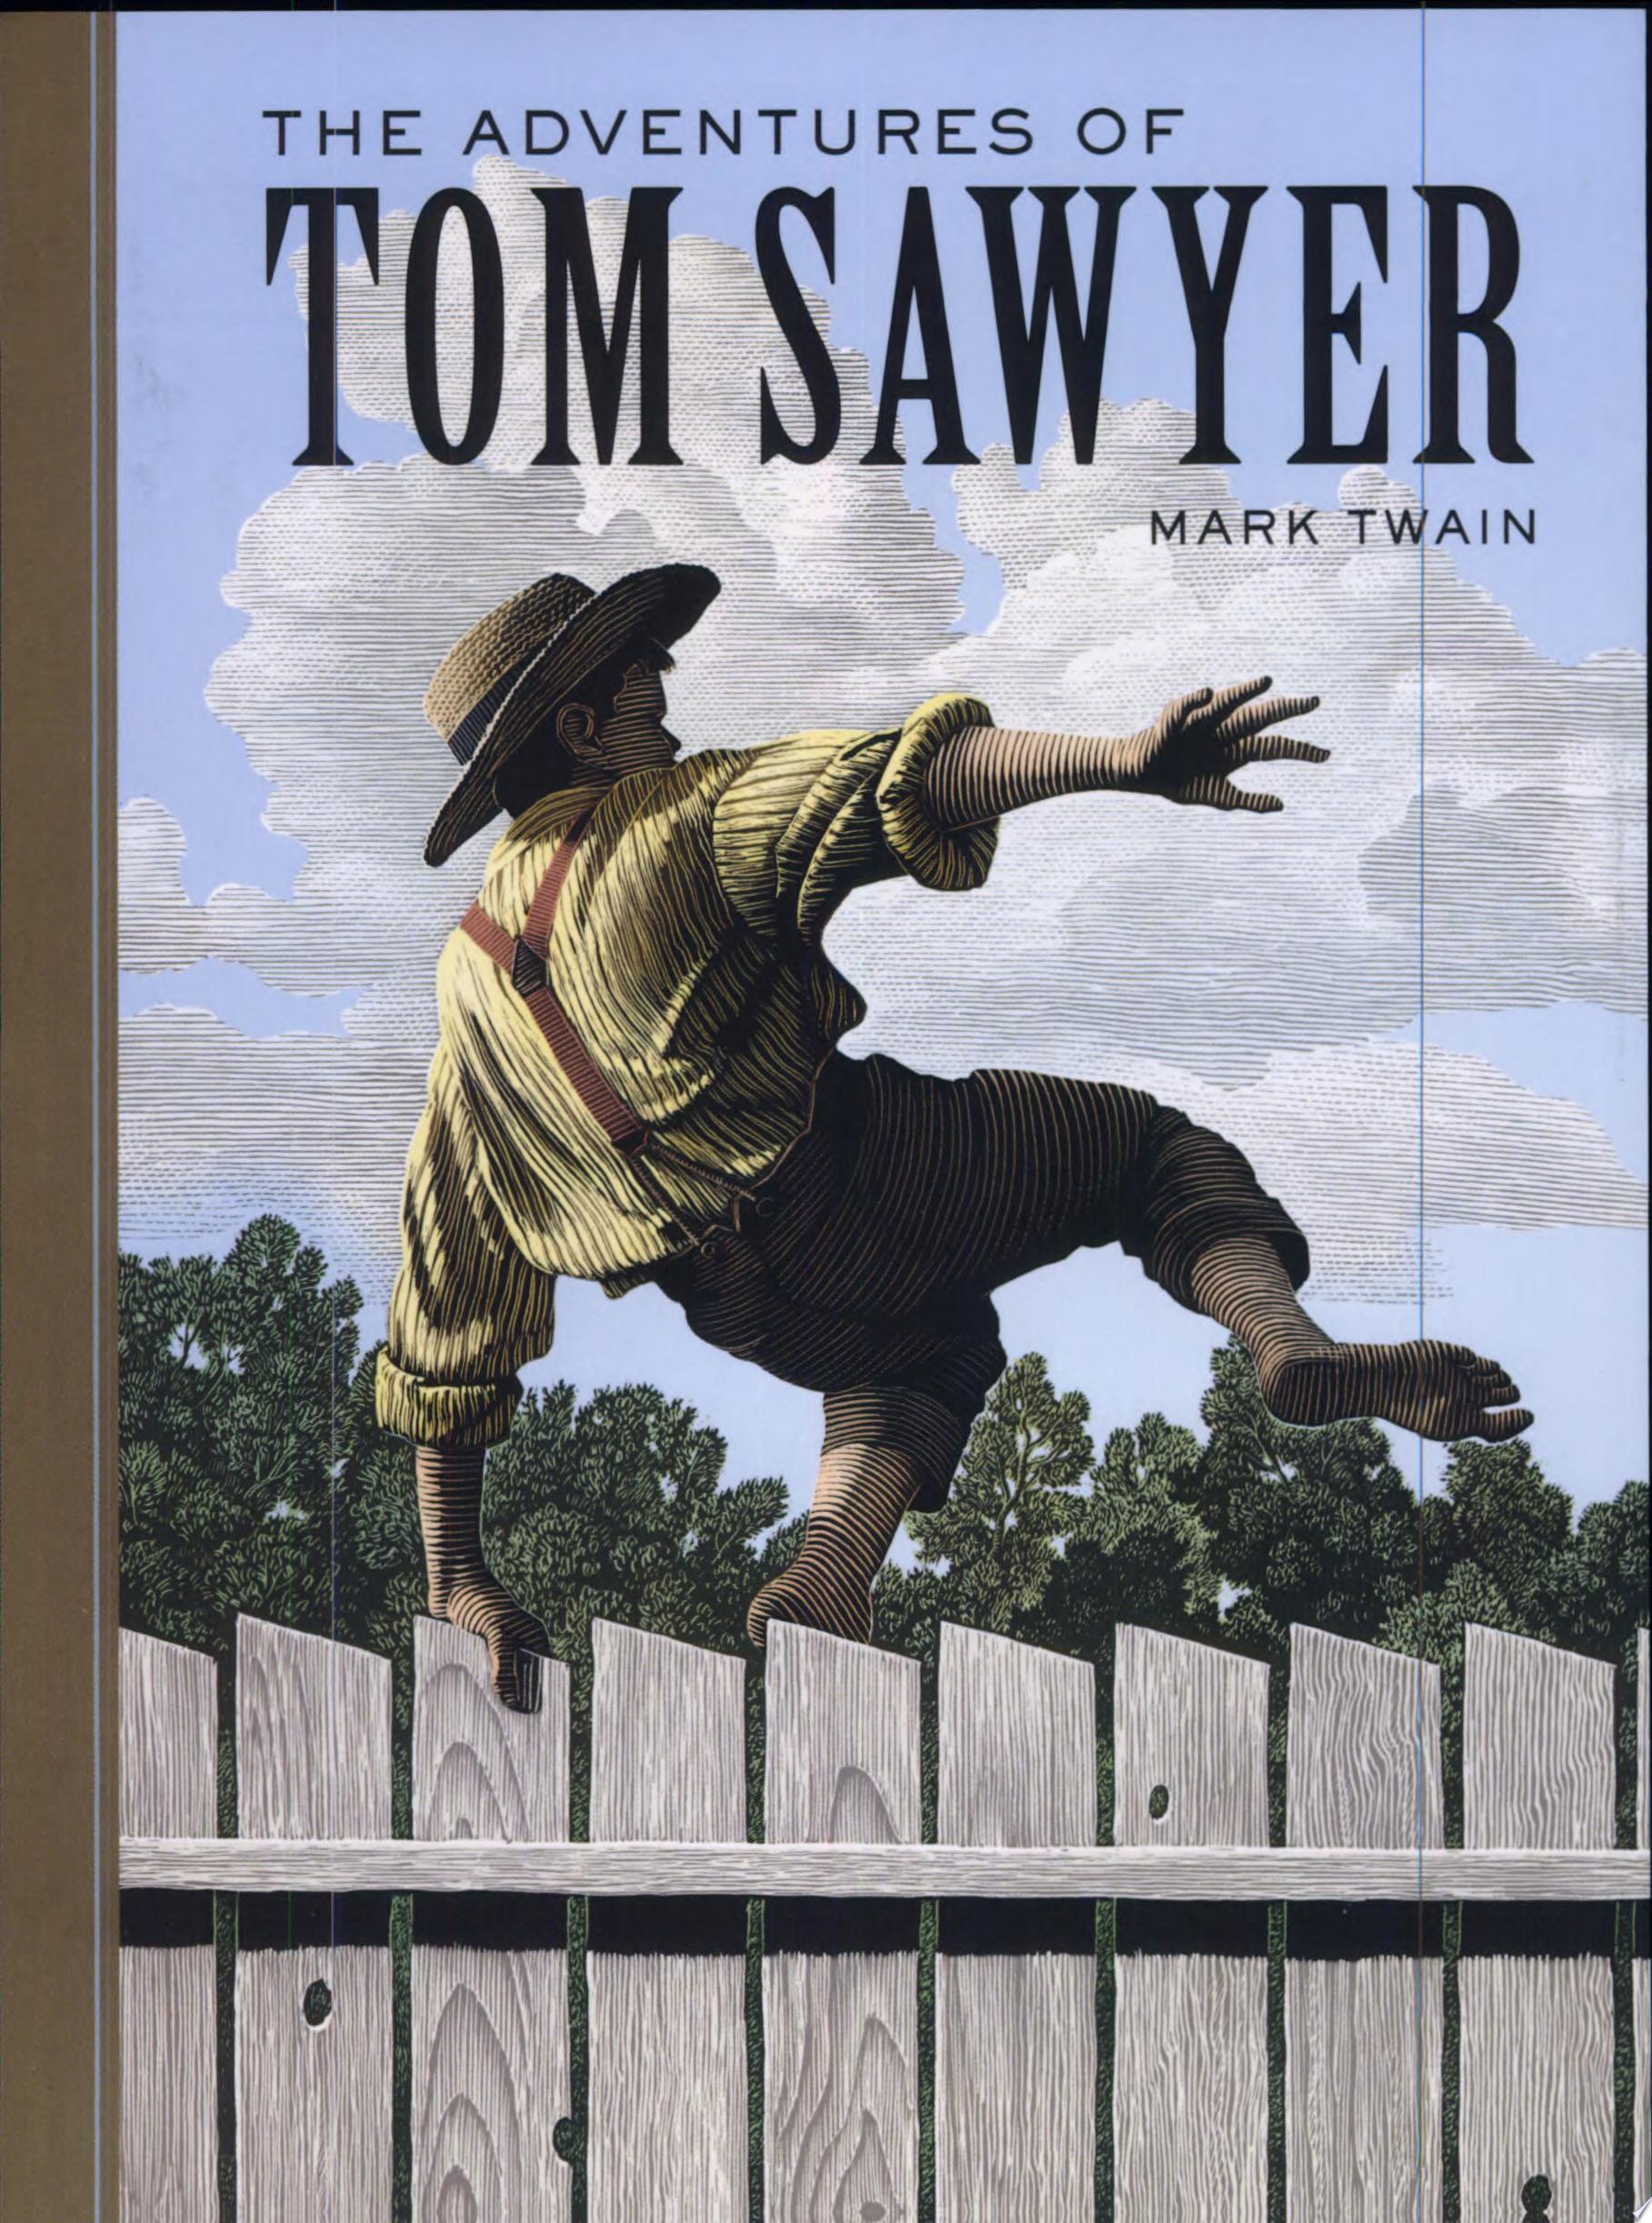 Image for "The Adventures of Tom Sawyer"